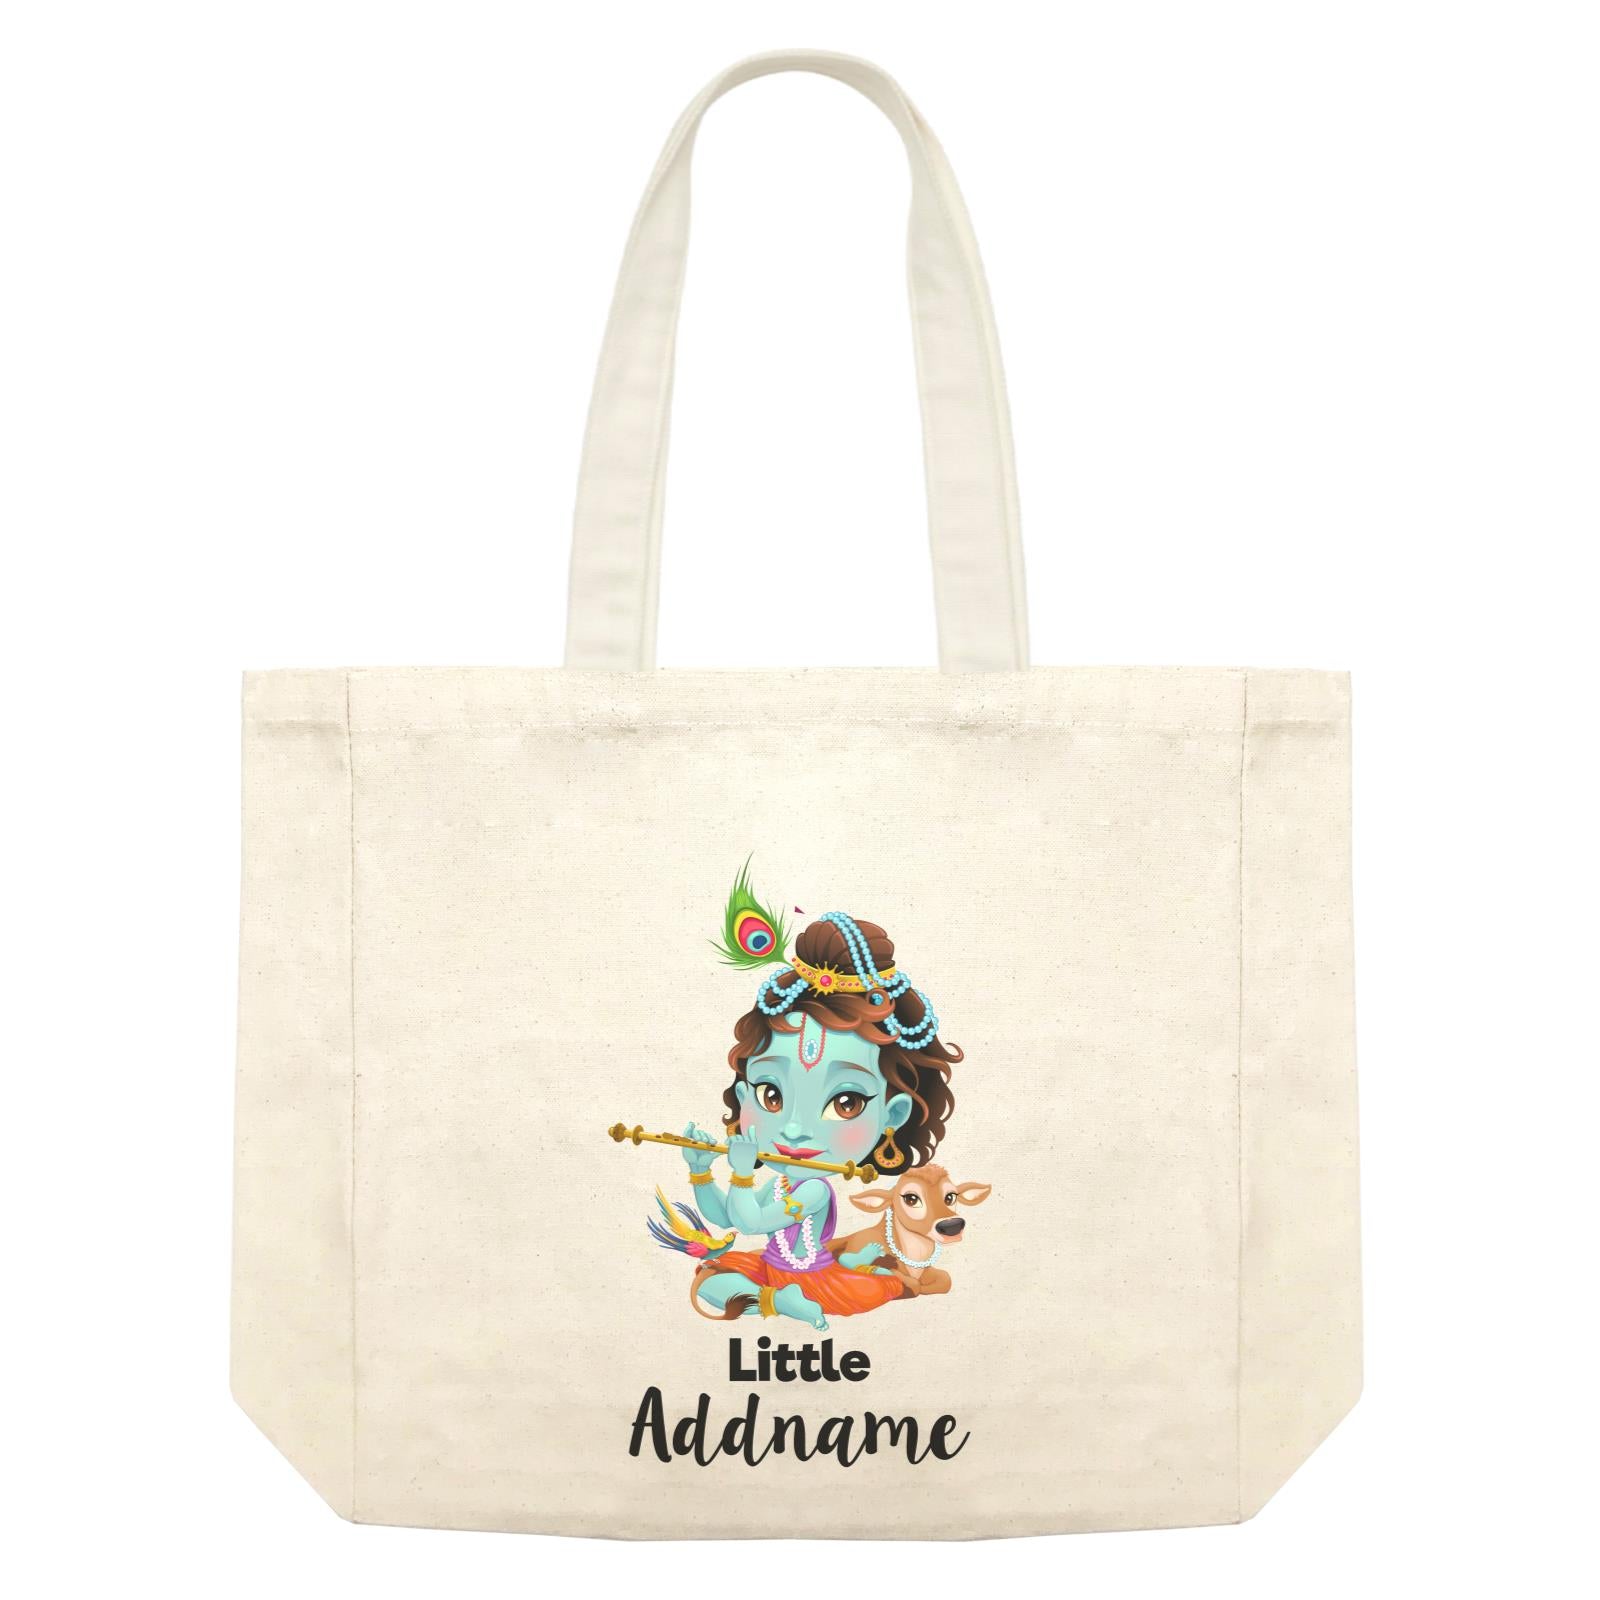 Artistic Krishna Playing Flute with Cow Little Addname Shopping Bag